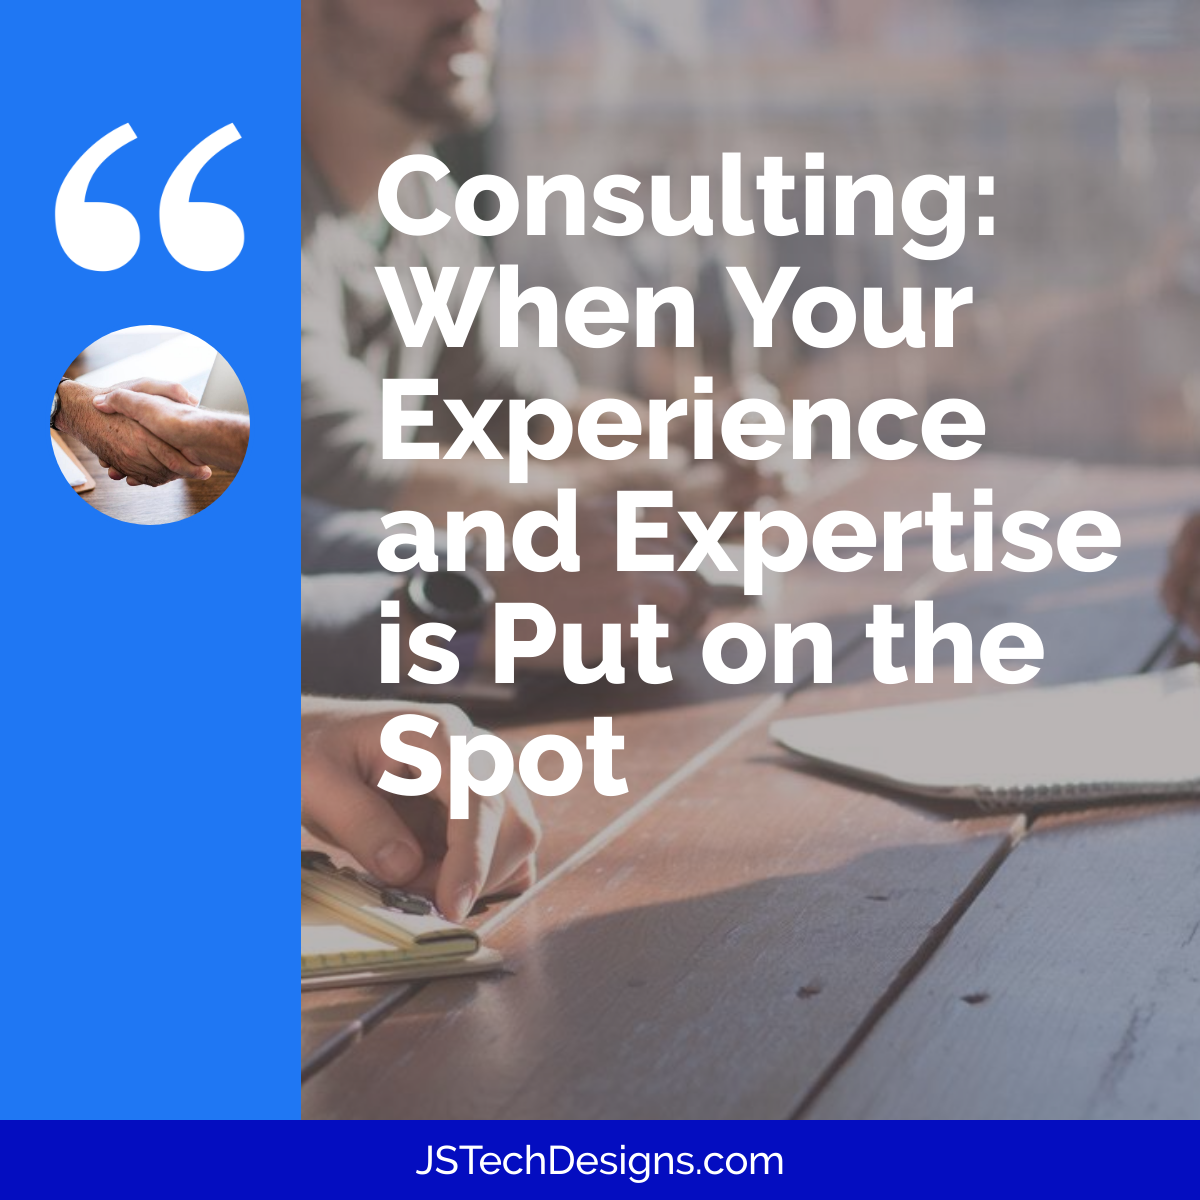 Consulting: When Your Experience and Expertise is Put on the Spot